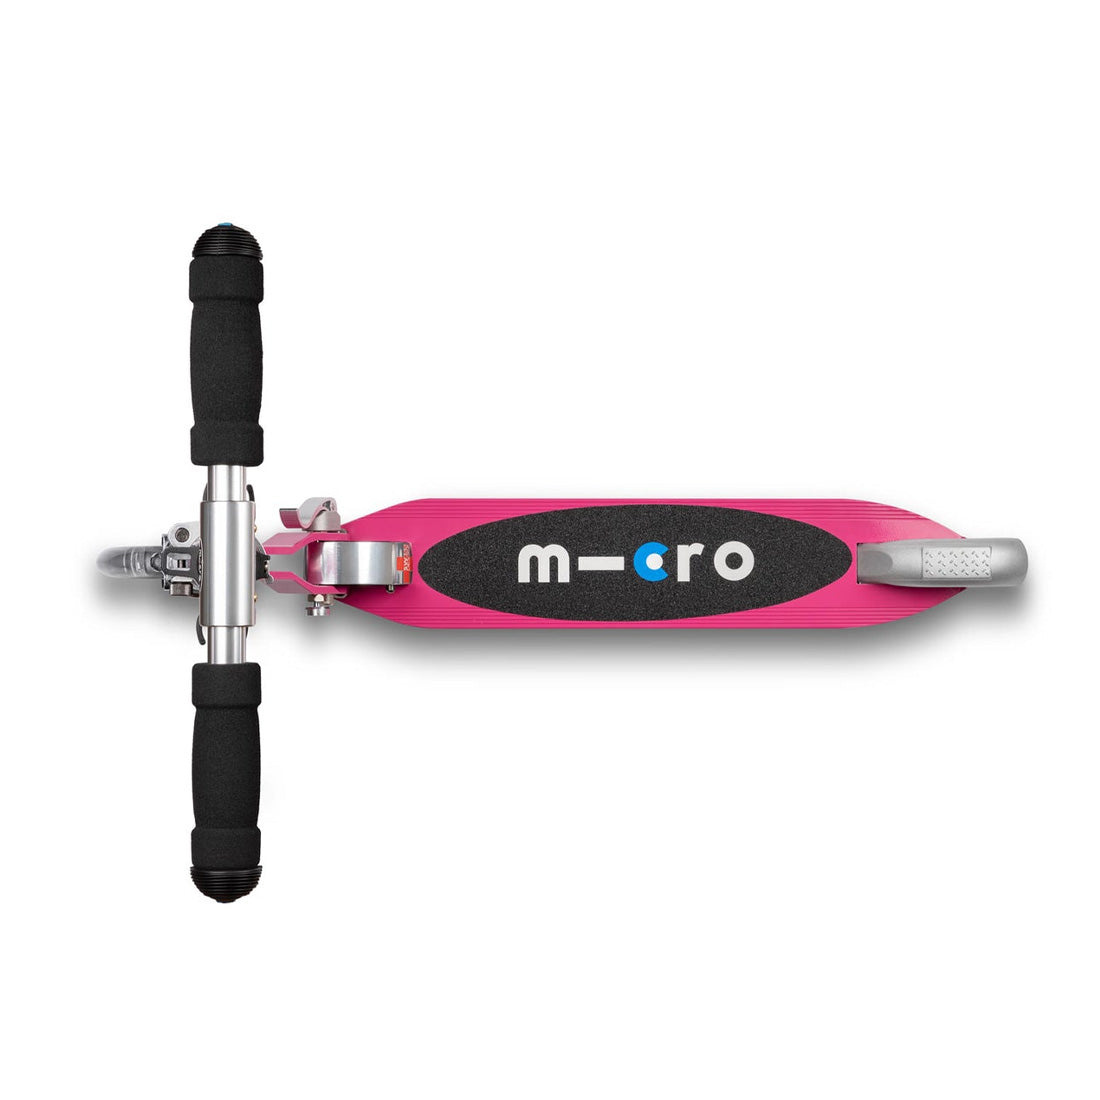 Micro Sprite Scooter - Pink Scooter Completes Rec